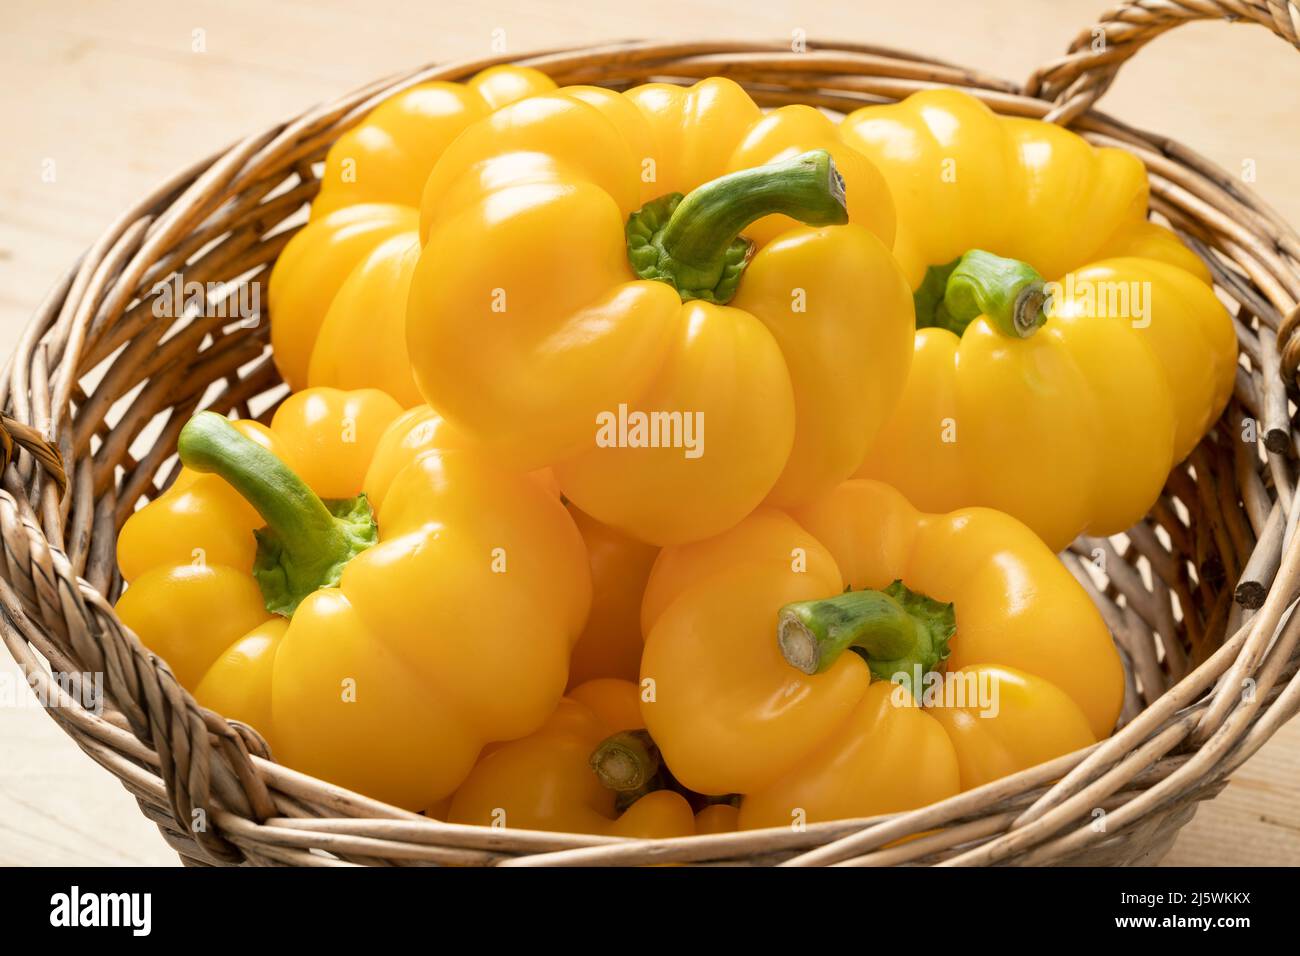 Basket with fresh picked homegrown yellow bell peppers close up Stock Photo